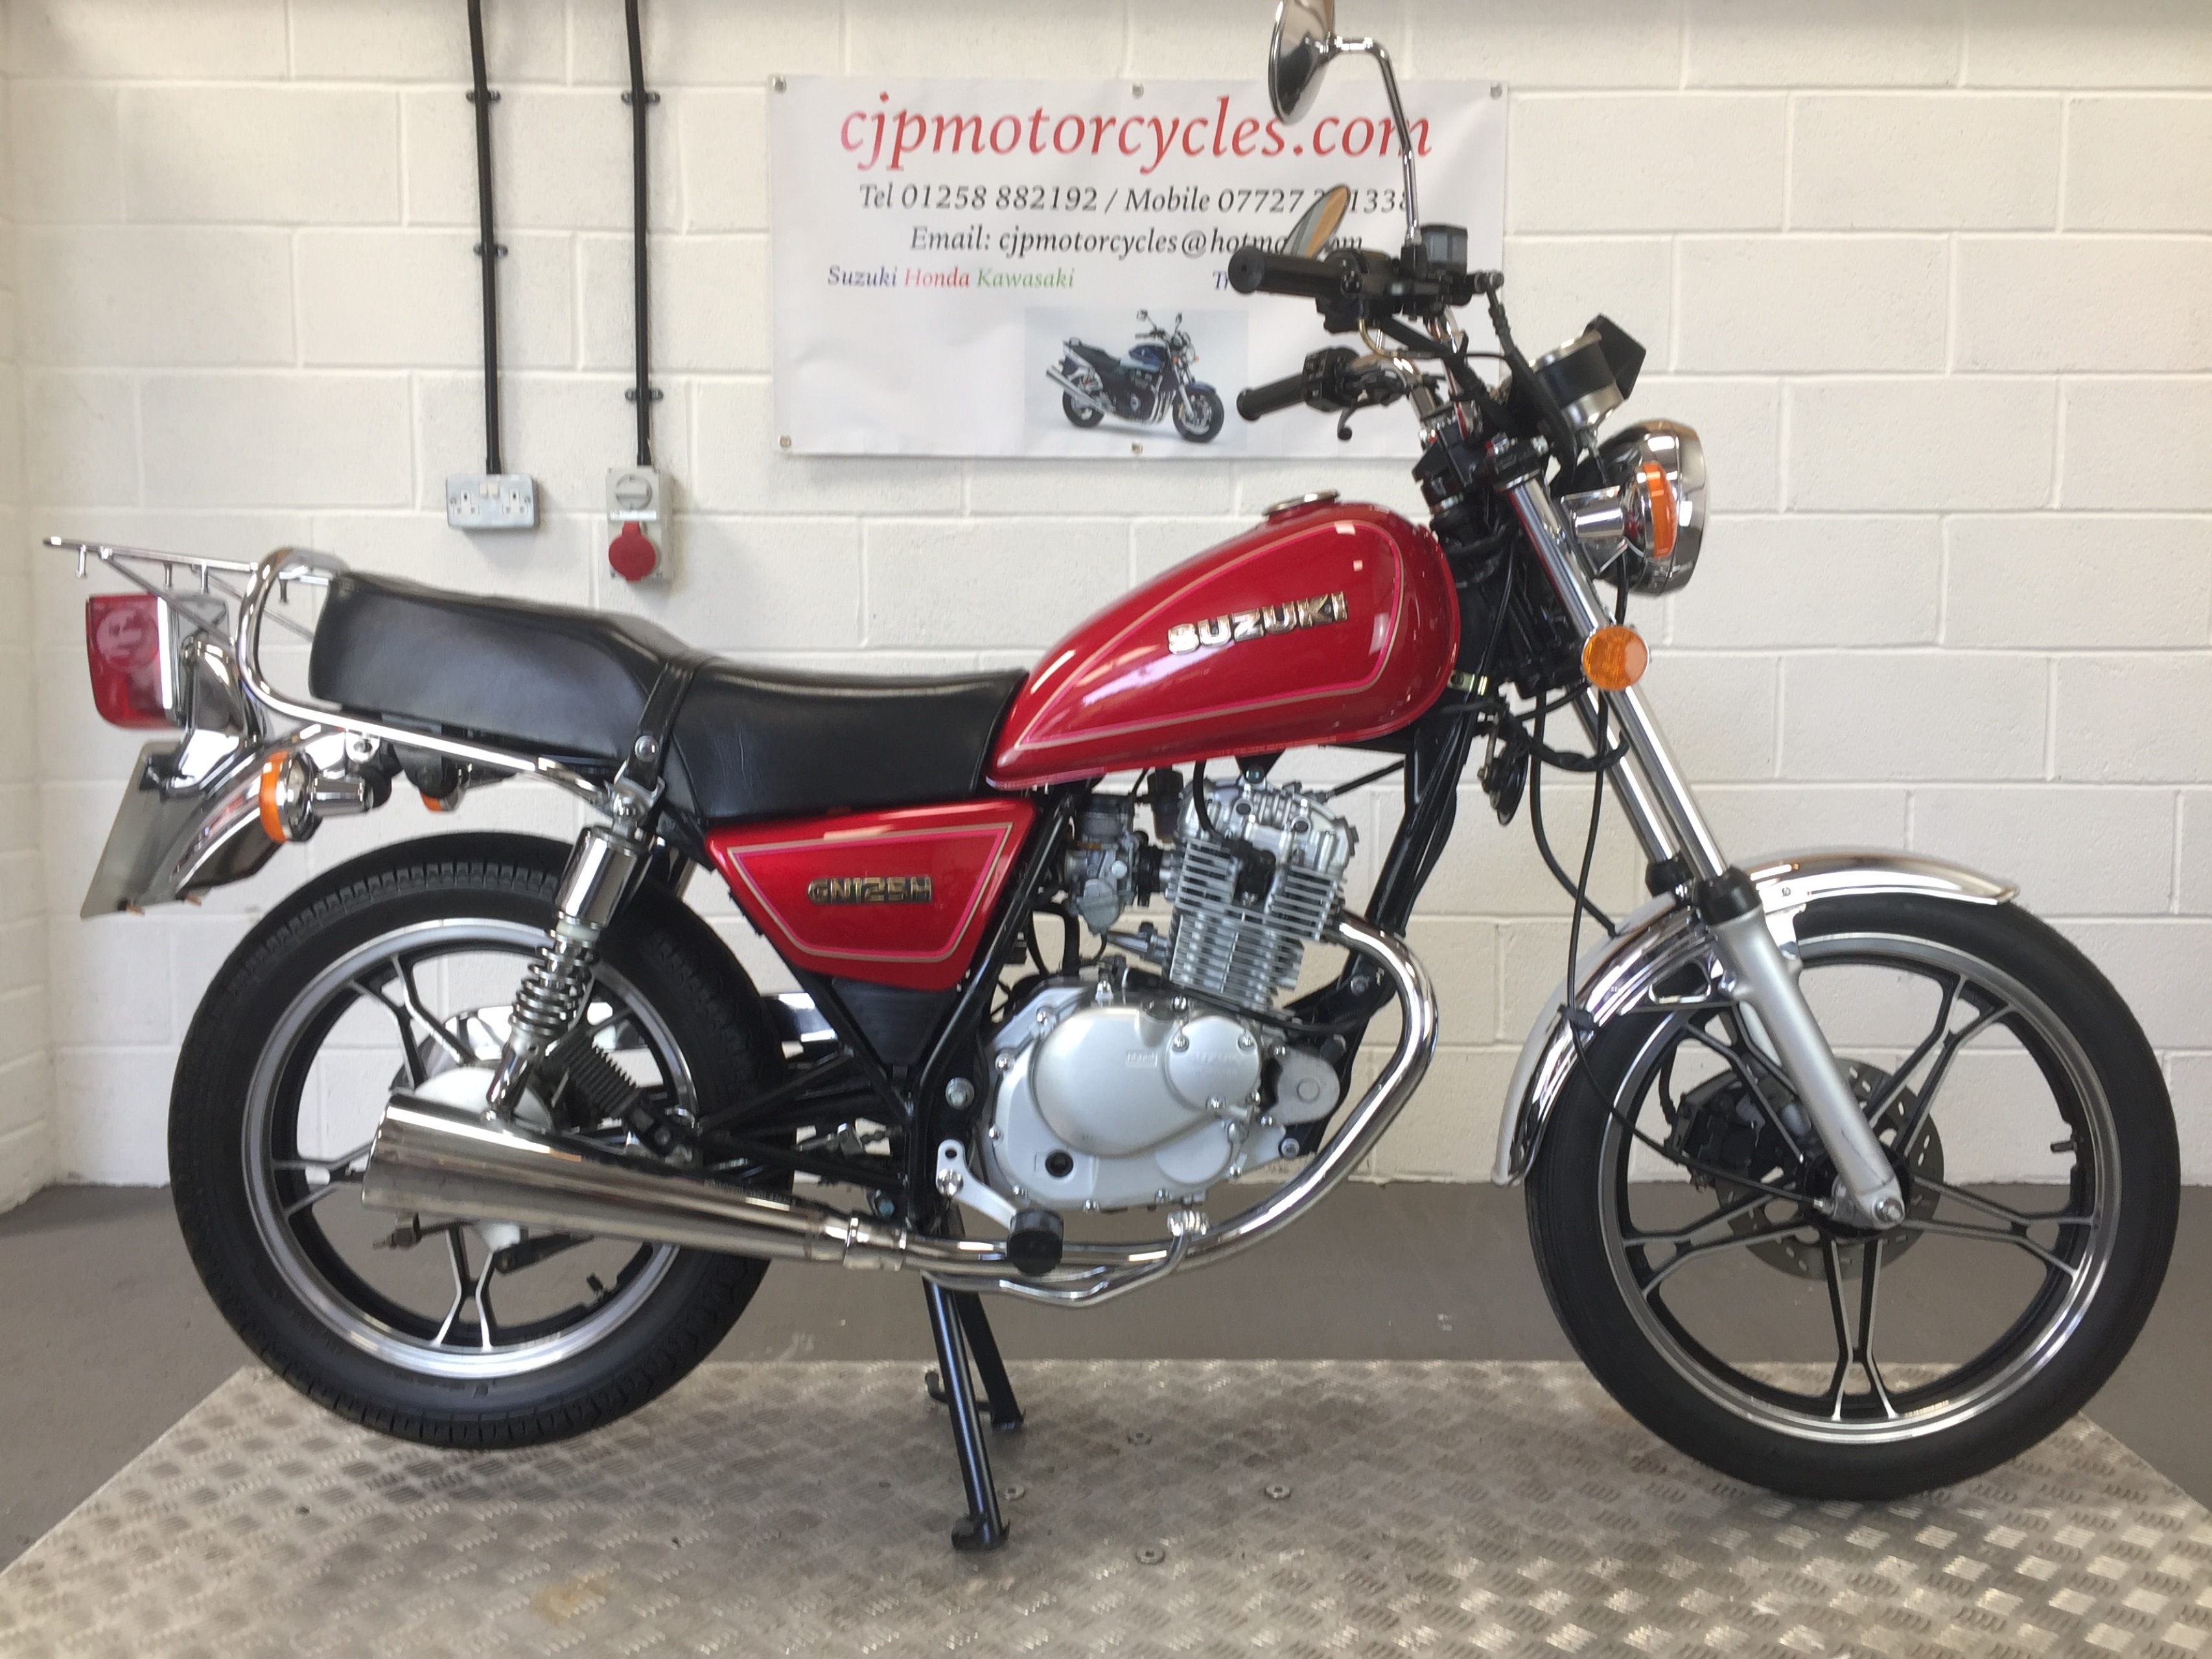 SUZUKI GN125 SOLD TO A LAD IN CORNWALL